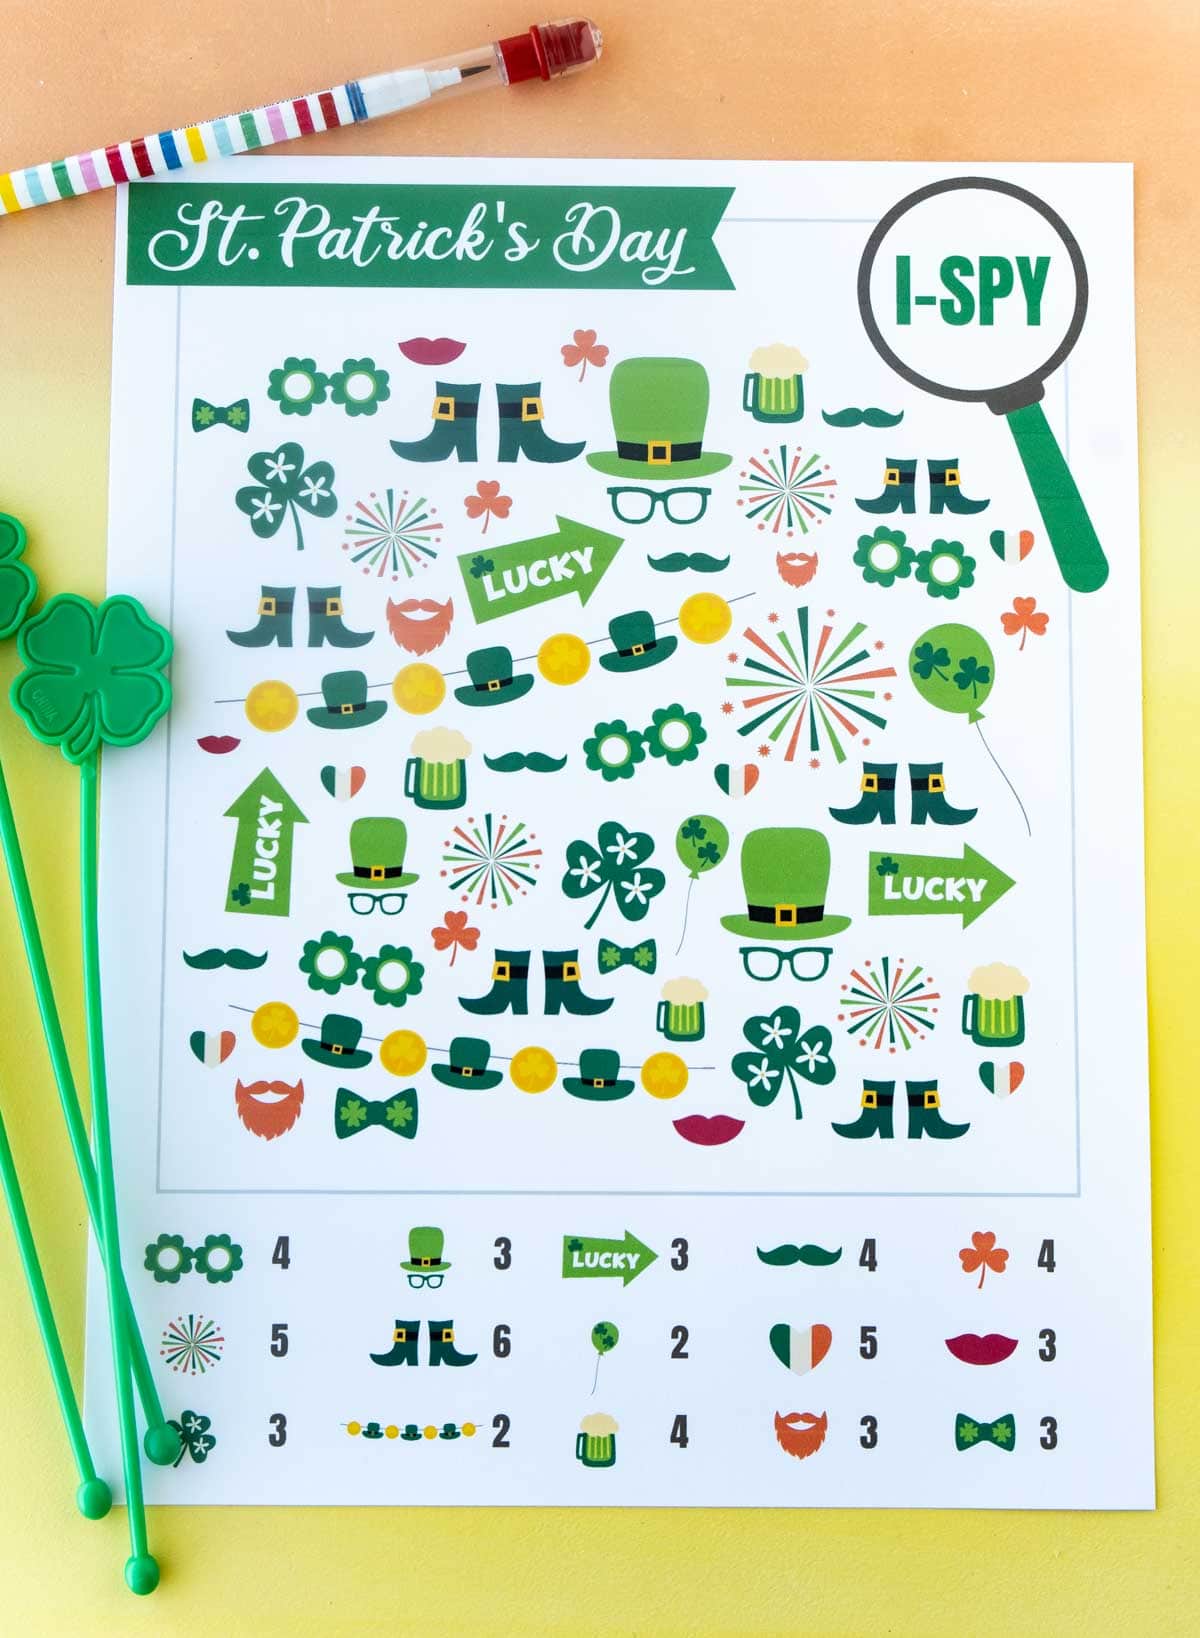 Printed out St. Patrick's Day i-spy sheet